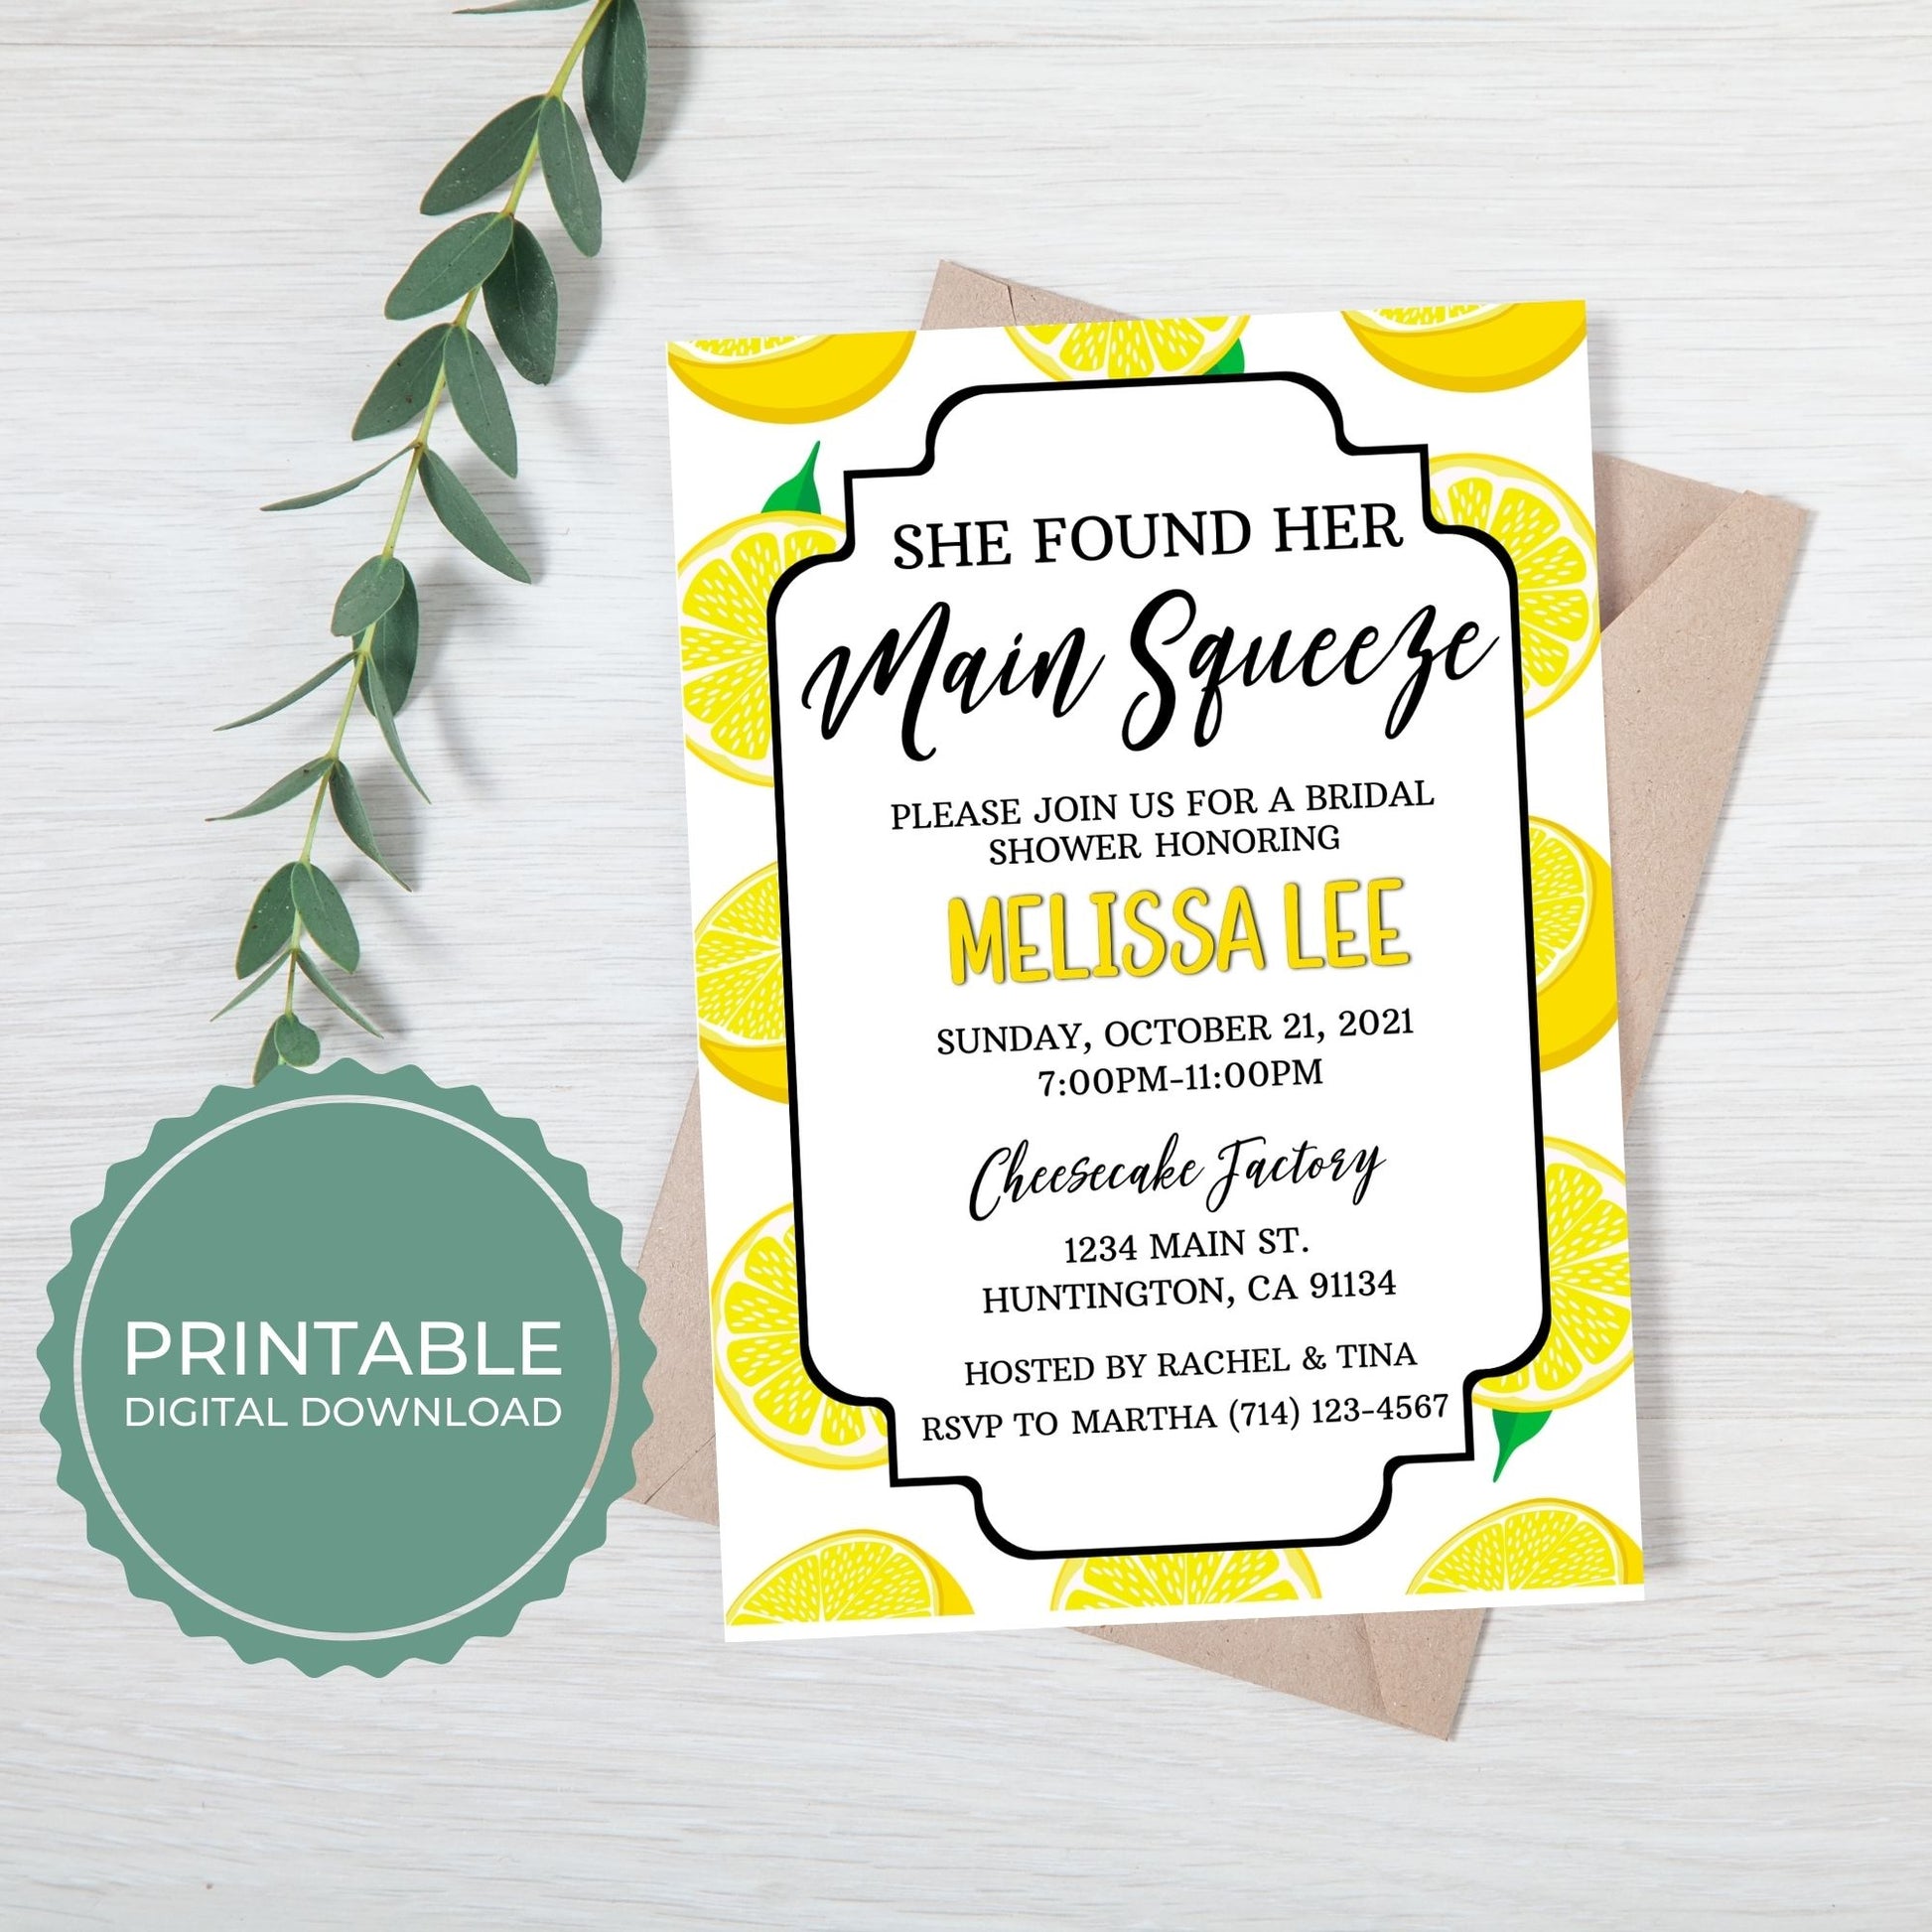 Bridal Shower Invitation Template - Main Squeeze - Droo & Aya